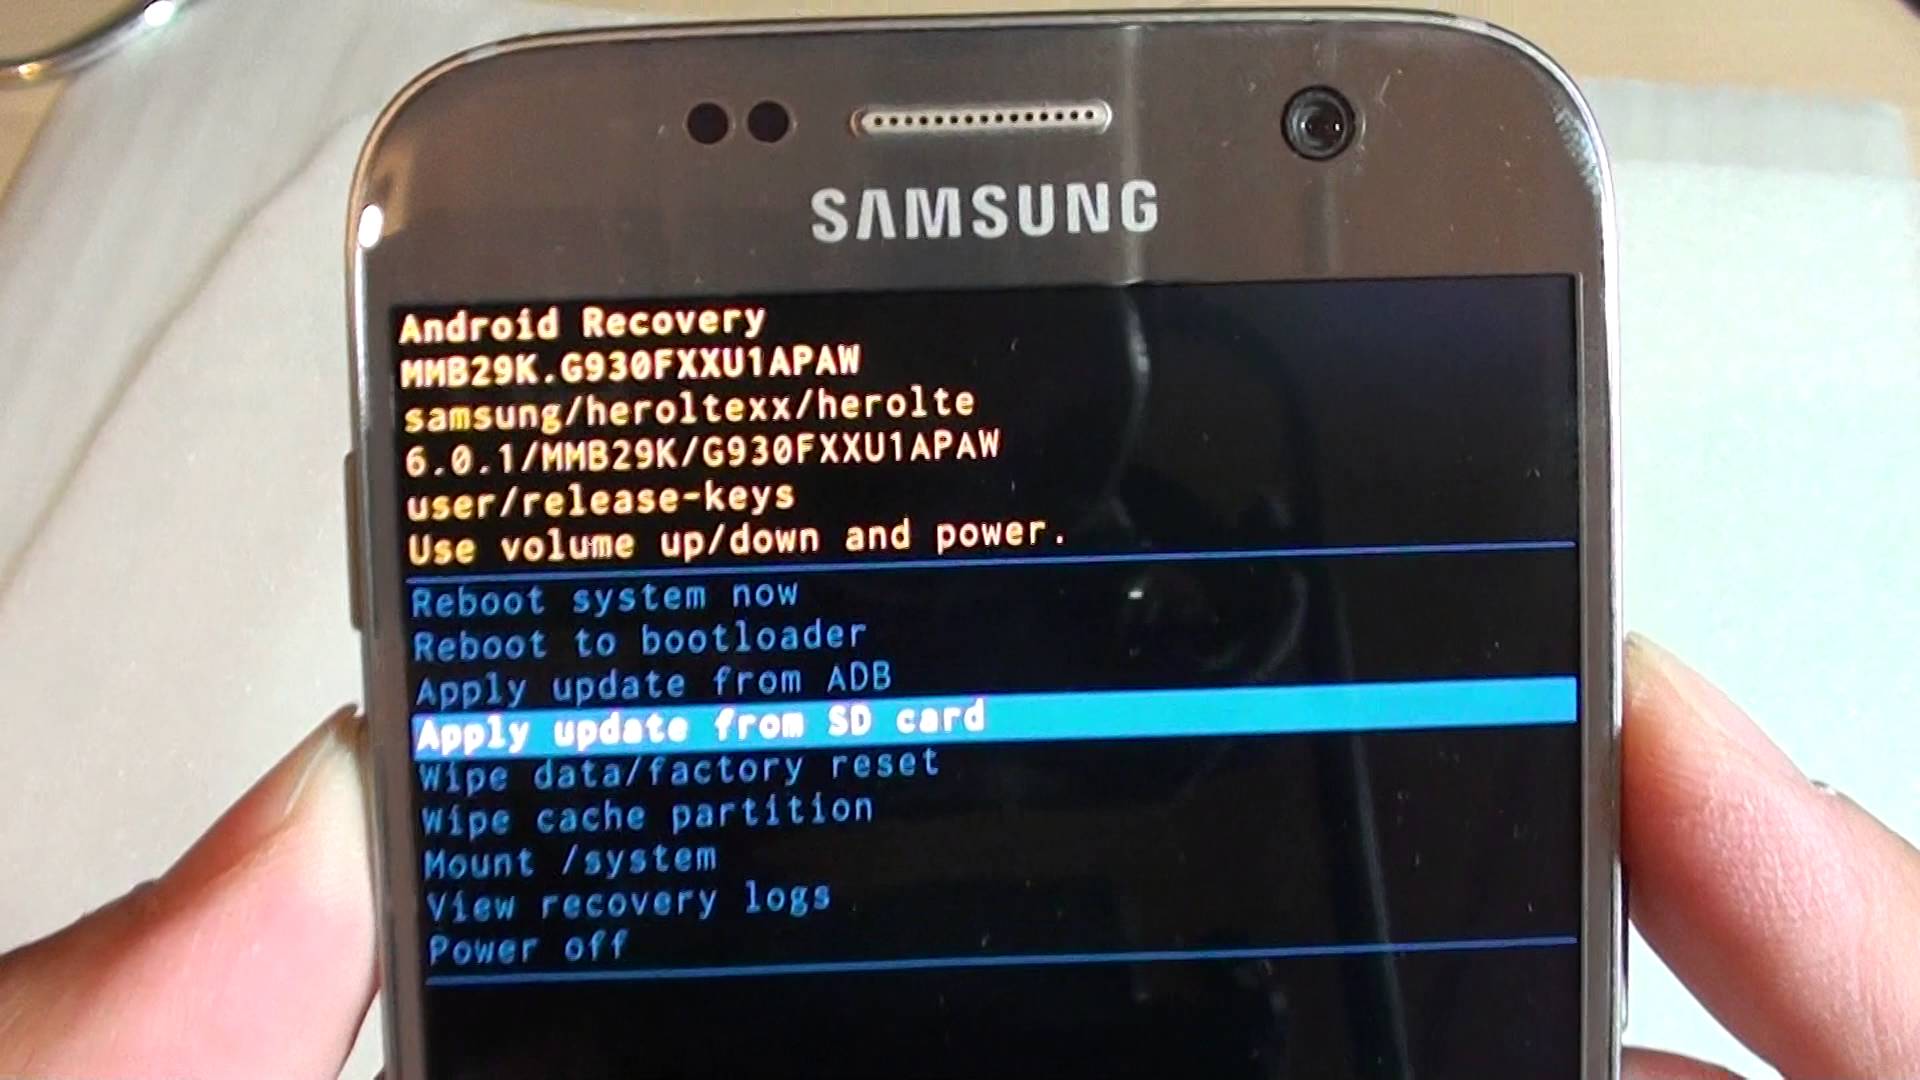 samsung syncmaster 226bw shutting off after a few seconds